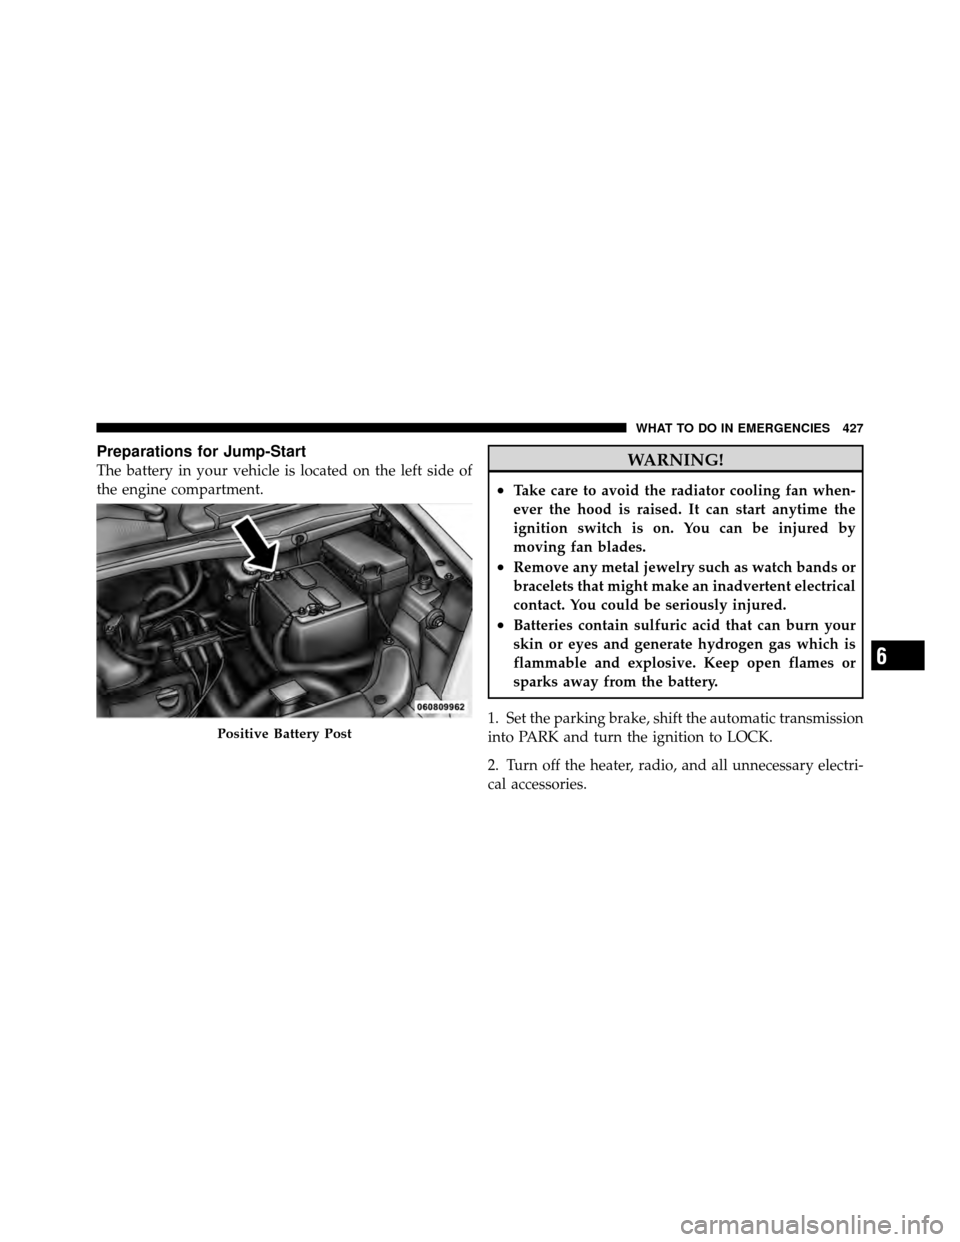 CHRYSLER TOWN AND COUNTRY 2010 5.G User Guide Preparations for Jump-Start
The battery in your vehicle is located on the left side of
the engine compartment.WARNING!
•Take care to avoid the radiator cooling fan when-
ever the hood is raised. It 